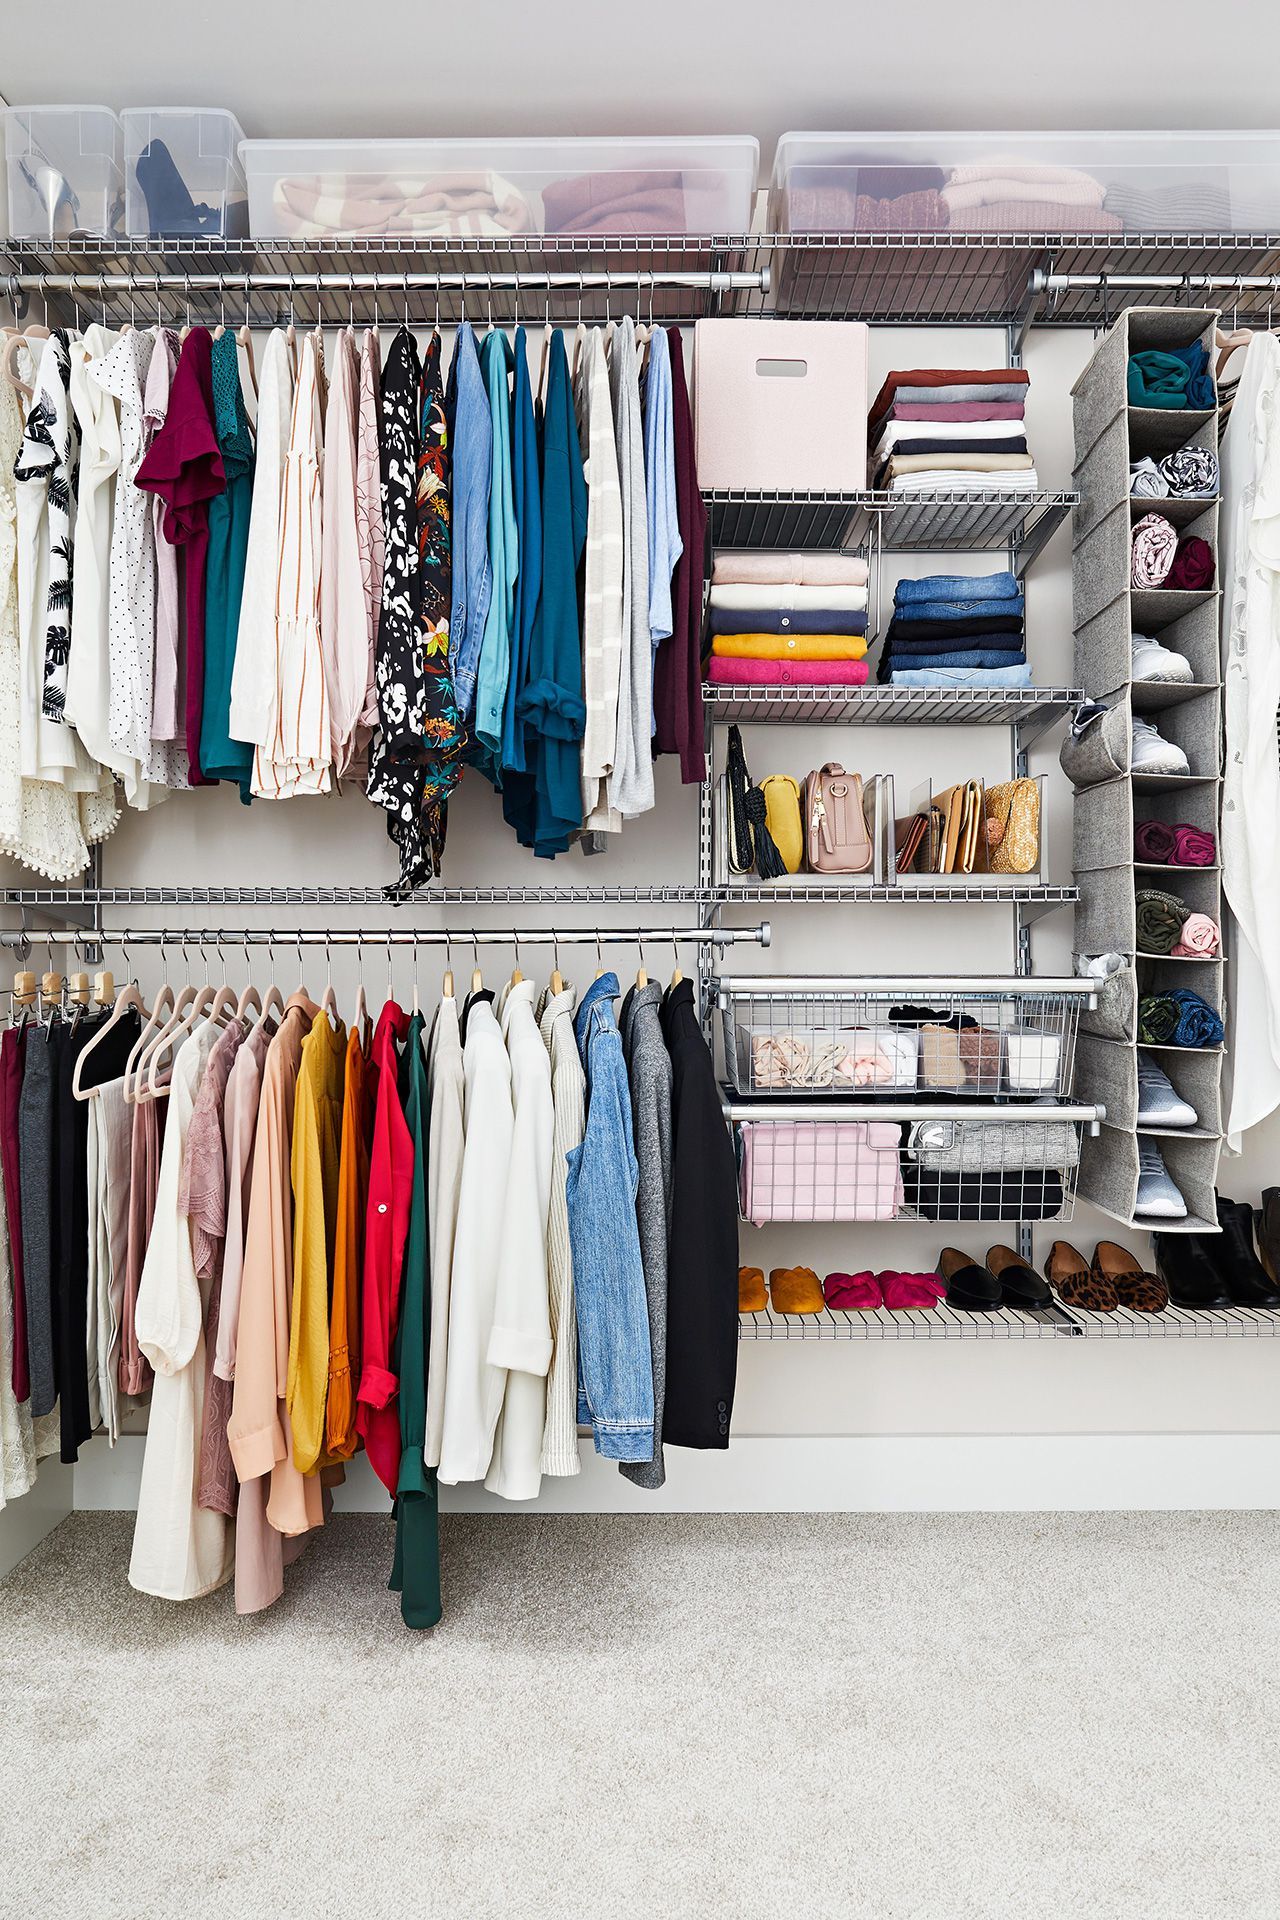 15 Storage Solutions For Your Biggest Closet Problems Regarding Wardrobes Hangers Storages (View 10 of 15)